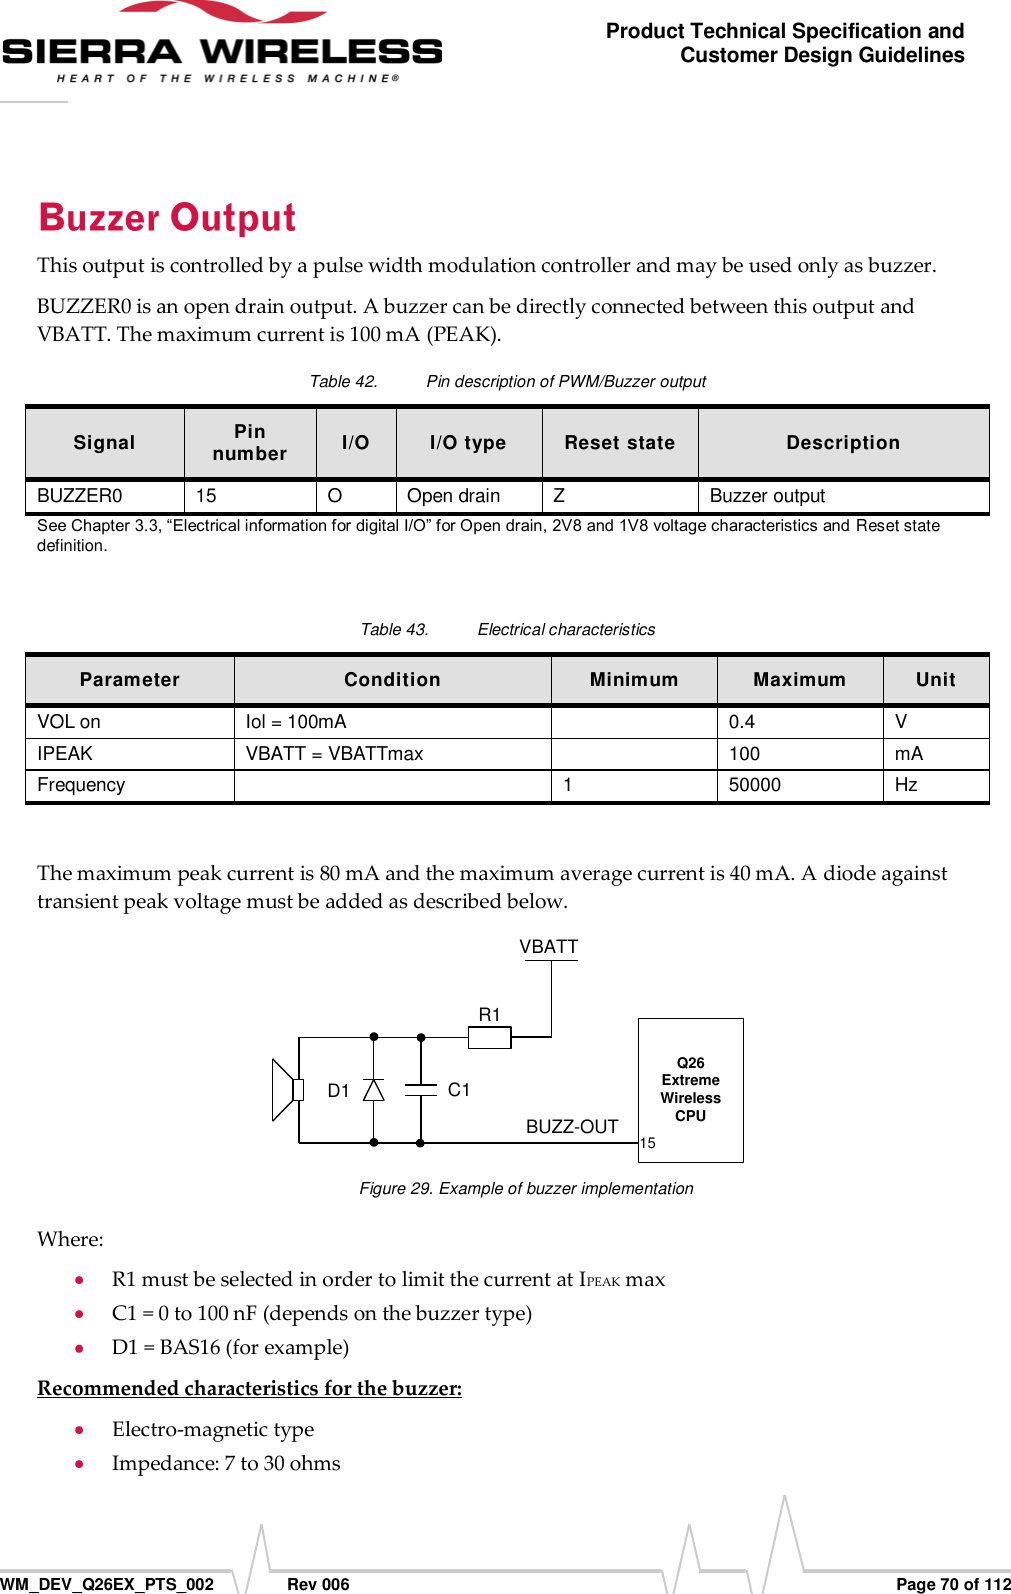      WM_DEV_Q26EX_PTS_002  Rev 006  Page 70 of 112 Product Technical Specification and Customer Design Guidelines This output is controlled by a pulse width modulation controller and may be used only as buzzer. BUZZER0 is an open drain output. A buzzer can be directly connected between this output and VBATT. The maximum current is 100 mA (PEAK).  Table 42.  Pin description of PWM/Buzzer output Signal Pin number I/O I/O type Reset state Description BUZZER0 15 O Open drain Z Buzzer output See Chapter 3.3, “Electrical information for digital I/O” for Open drain, 2V8 and 1V8 voltage characteristics and Reset state definition.  Table 43.  Electrical characteristics Parameter Condition Minimum Maximum Unit VOL on Iol = 100mA  0.4 V IPEAK VBATT = VBATTmax  100 mA Frequency  1 50000 Hz  The maximum peak current is 80 mA and the maximum average current is 40 mA. A diode against transient peak voltage must be added as described below.   BUZZ-OUT C1  D1 VBATT  R1 Q26 Extreme Wireless CPU 15 Figure 29. Example of buzzer implementation Where:  R1 must be selected in order to limit the current at IPEAK max  C1 = 0 to 100 nF (depends on the buzzer type)  D1 = BAS16 (for example) Recommended characteristics for the buzzer:  Electro-magnetic type  Impedance: 7 to 30 ohms 